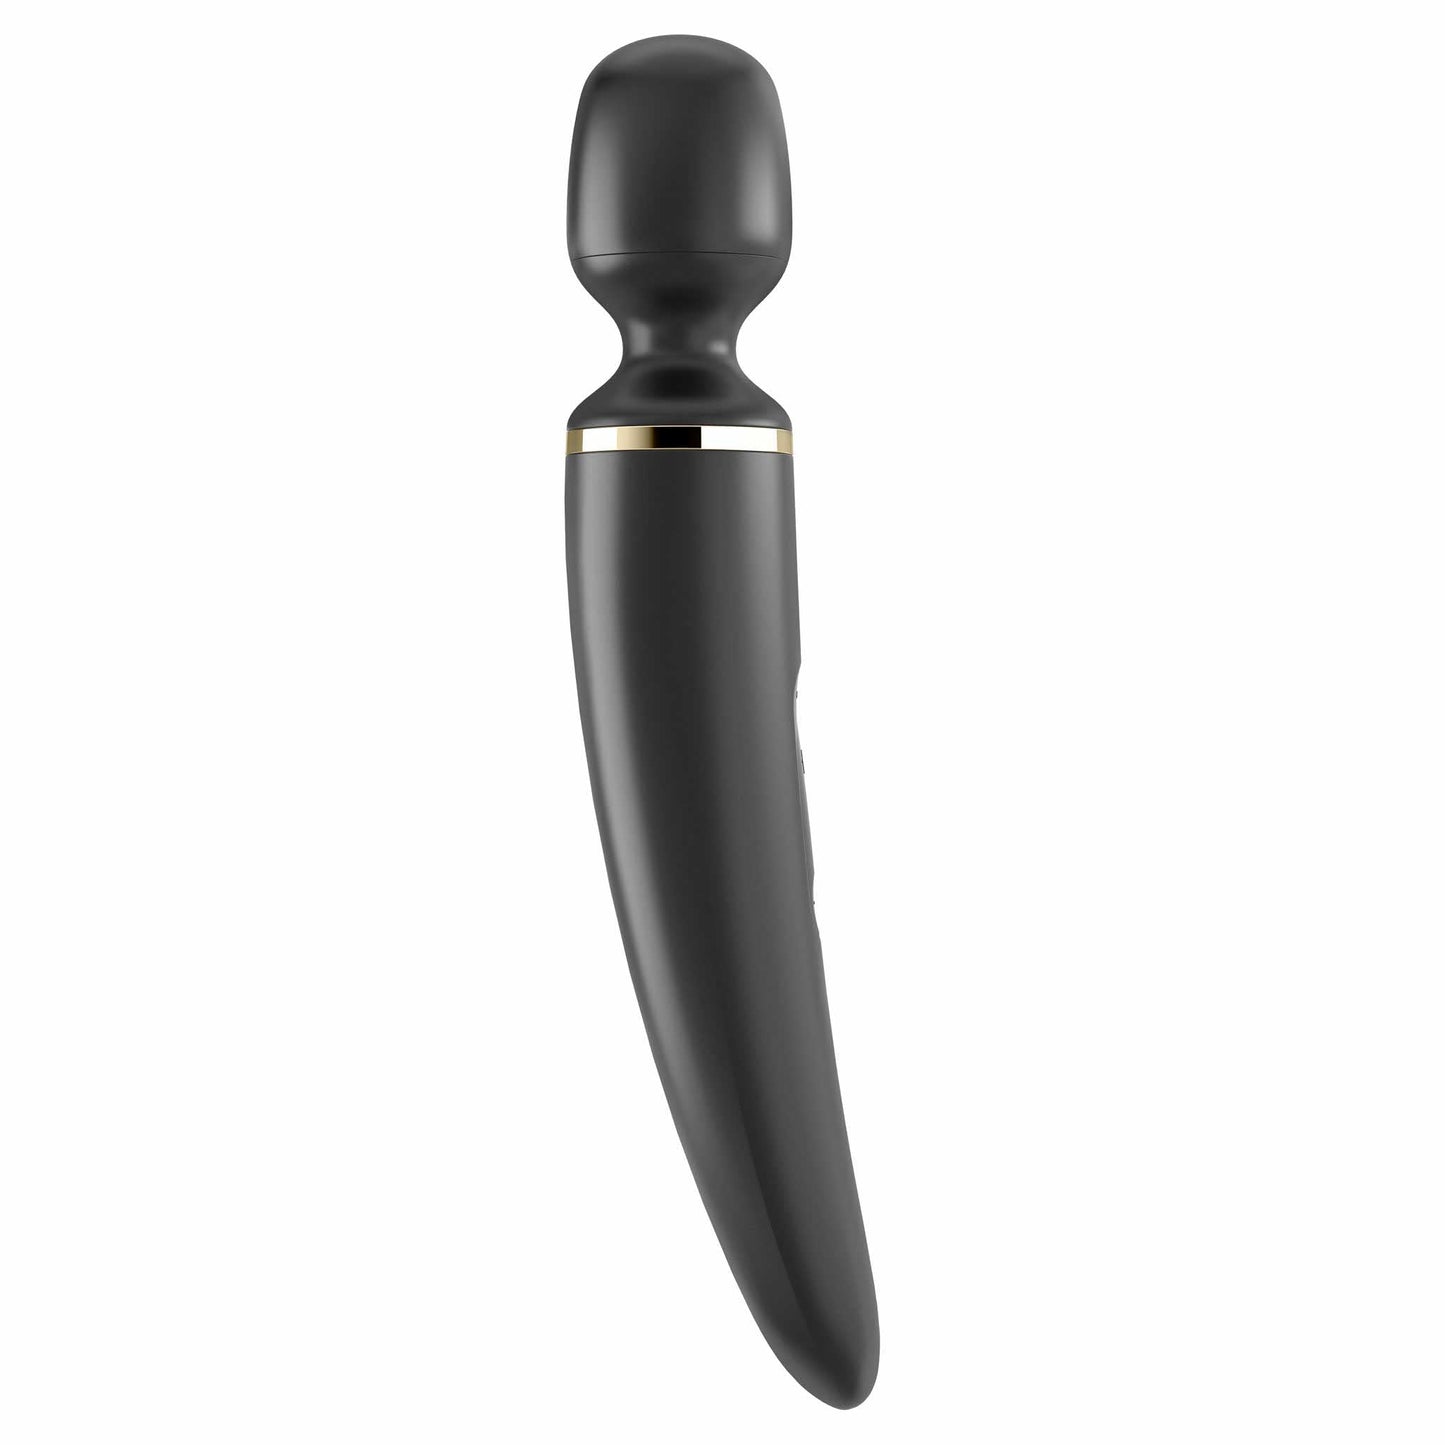 side view of the satisfyer wand-er woman vibrator eis059 black